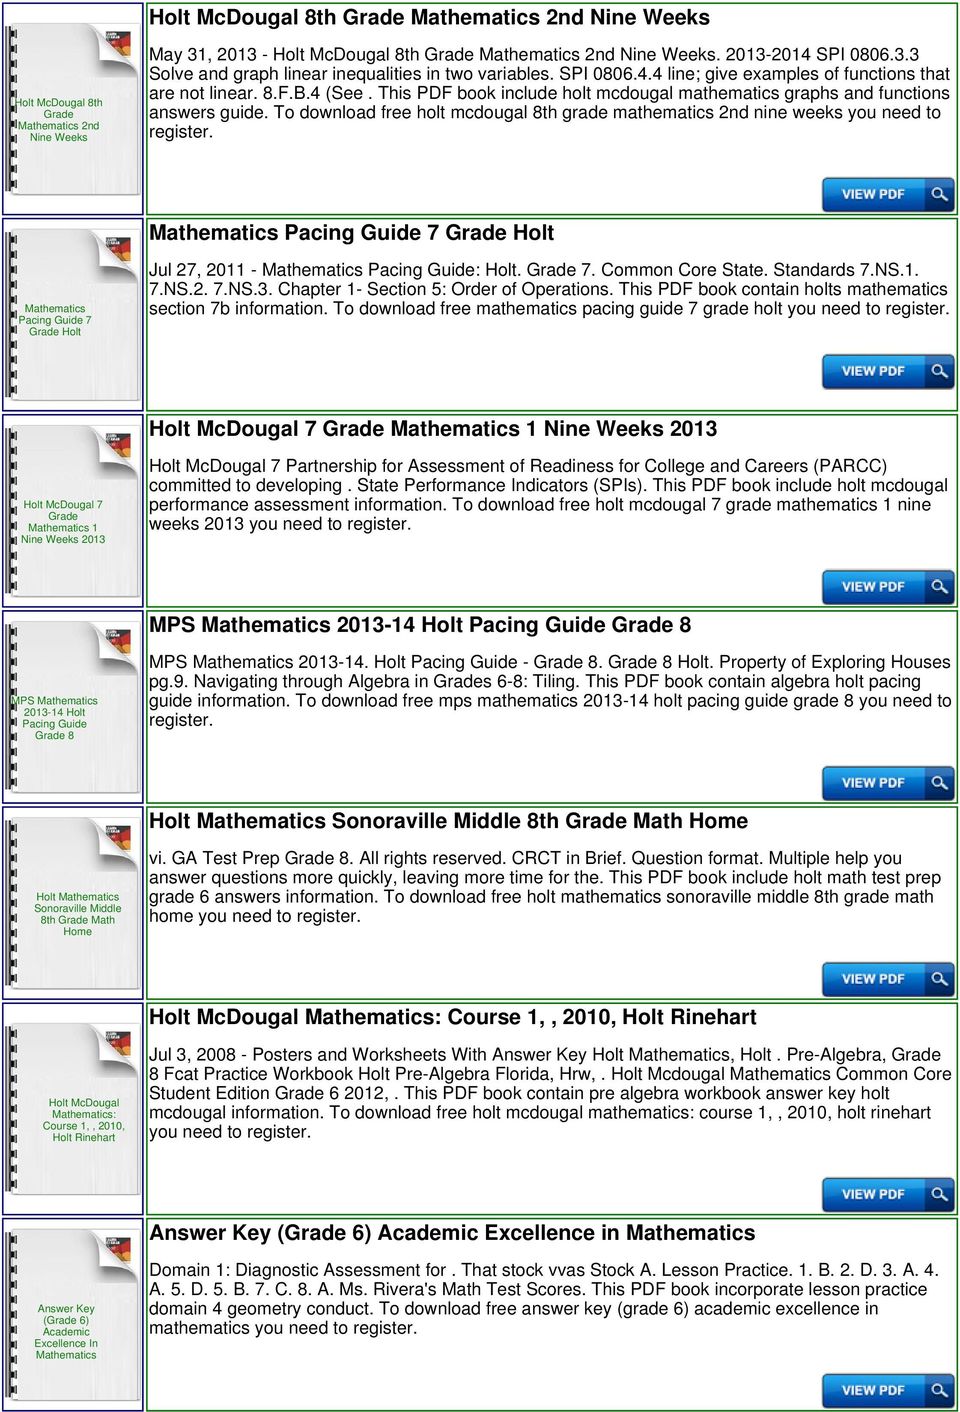 To download free holt mcdougal 8th grade mathematics 2nd nine weeks you need to Pacing Guide 7 Holt Pacing Guide 7 Holt Jul 27, 2011 - Pacing Guide: Holt. 7. Common Core State. Standards 7.NS.1. 7.NS.2. 7.NS.3.